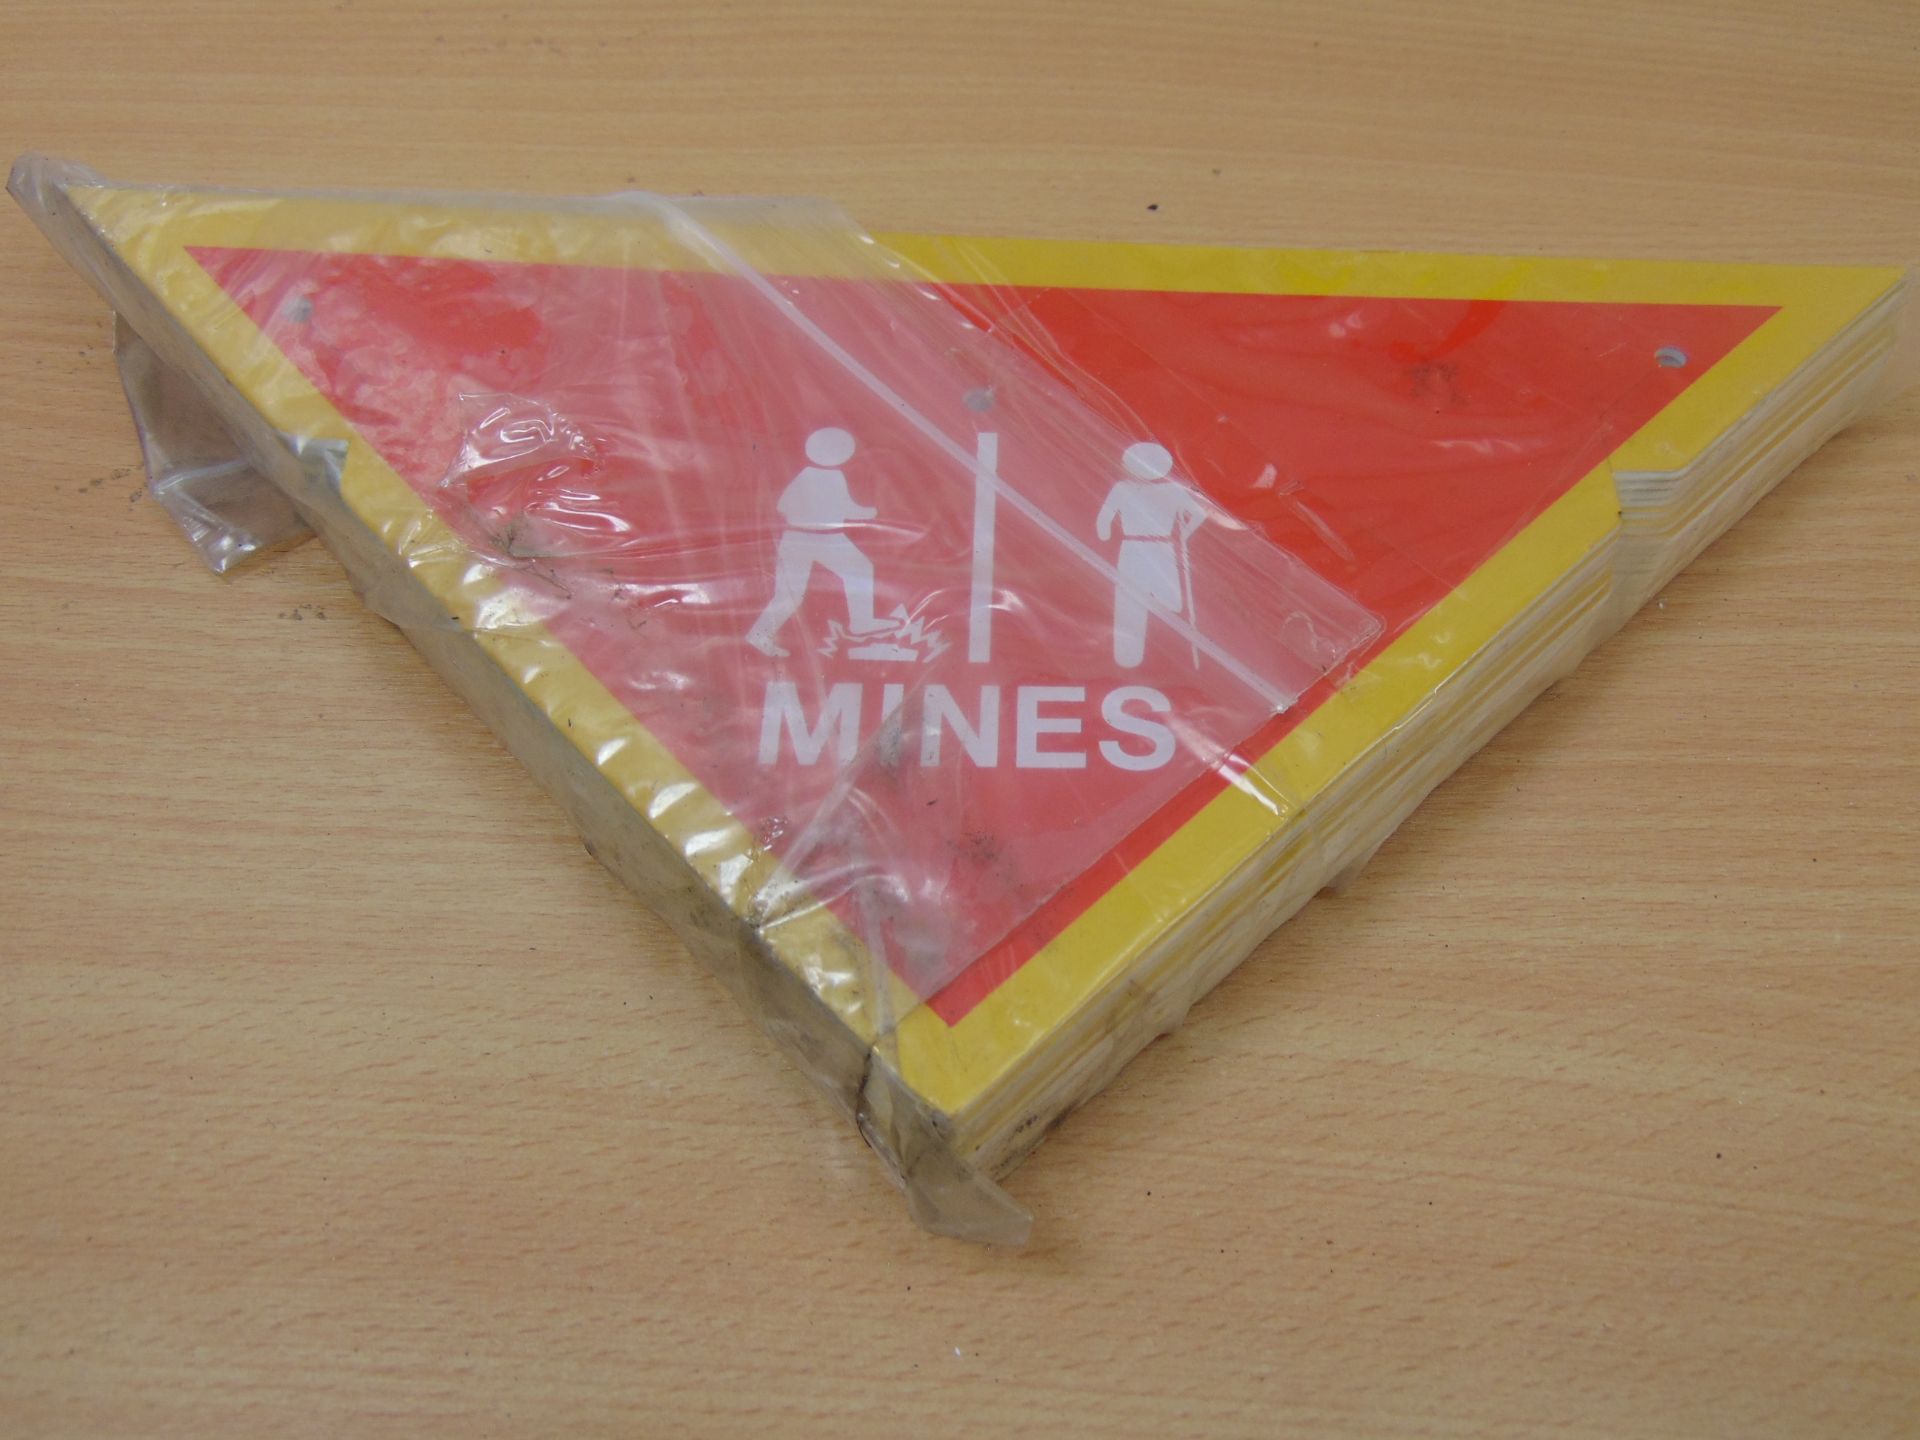 1X PACK OF 17 UNUSED MINE SIGNS - UNWRAPPED - Image 3 of 3